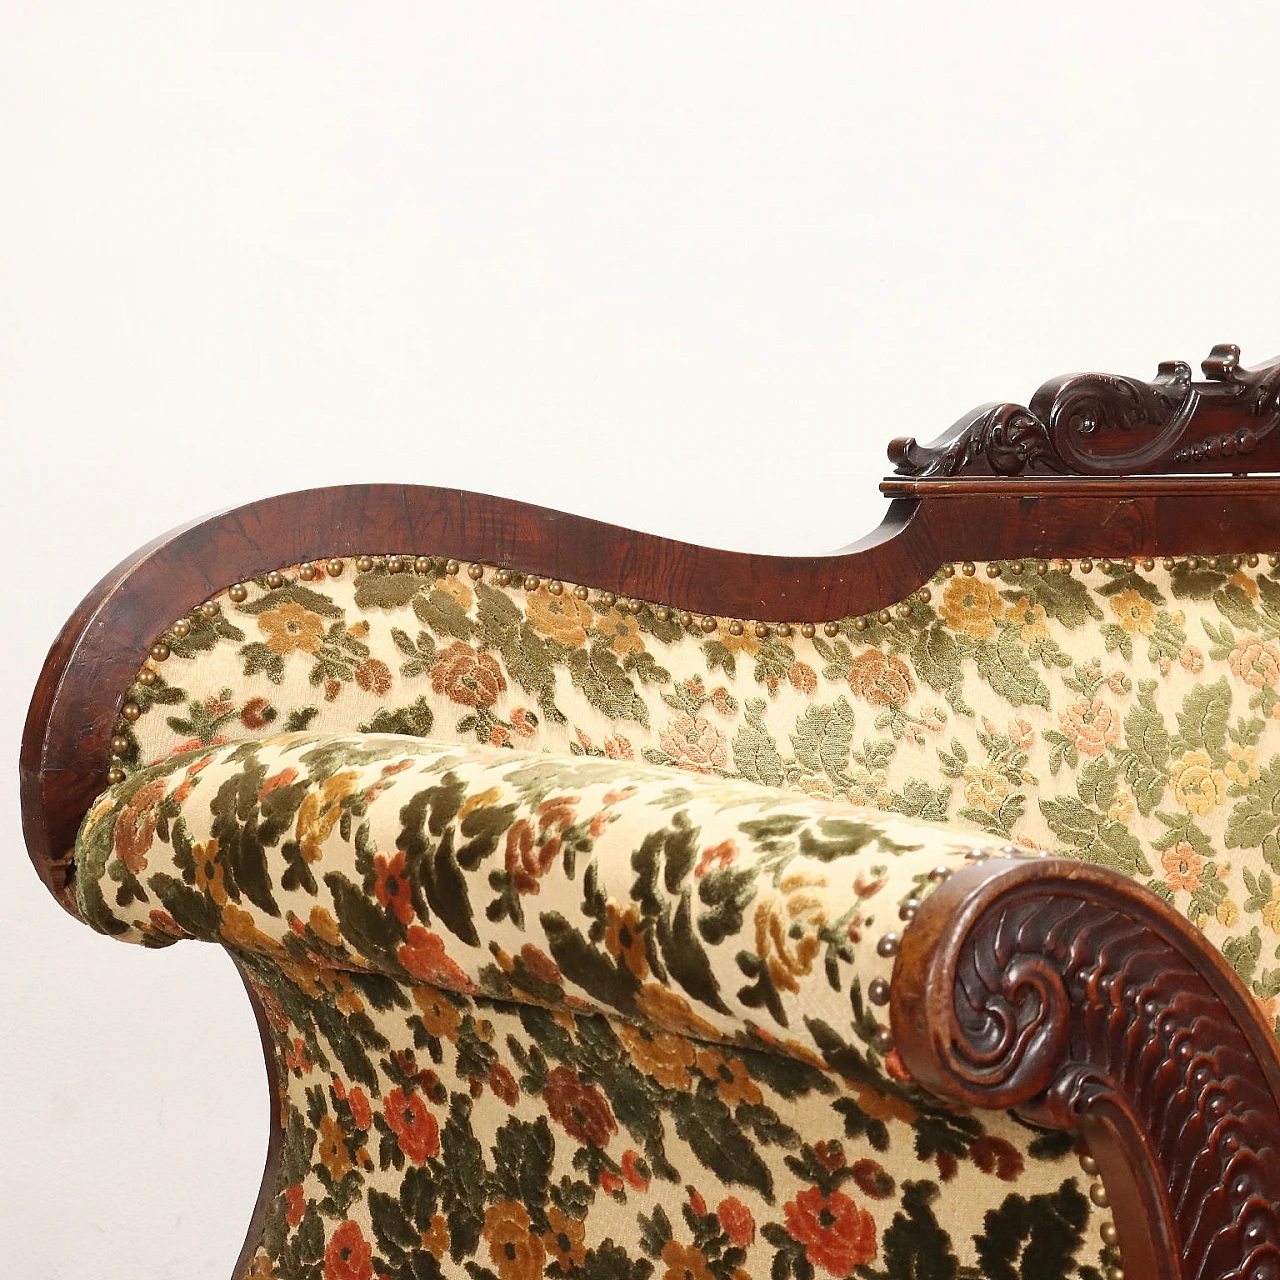 Mahogany sofa with carved leaf motifs and floral fabric, 19th century 4